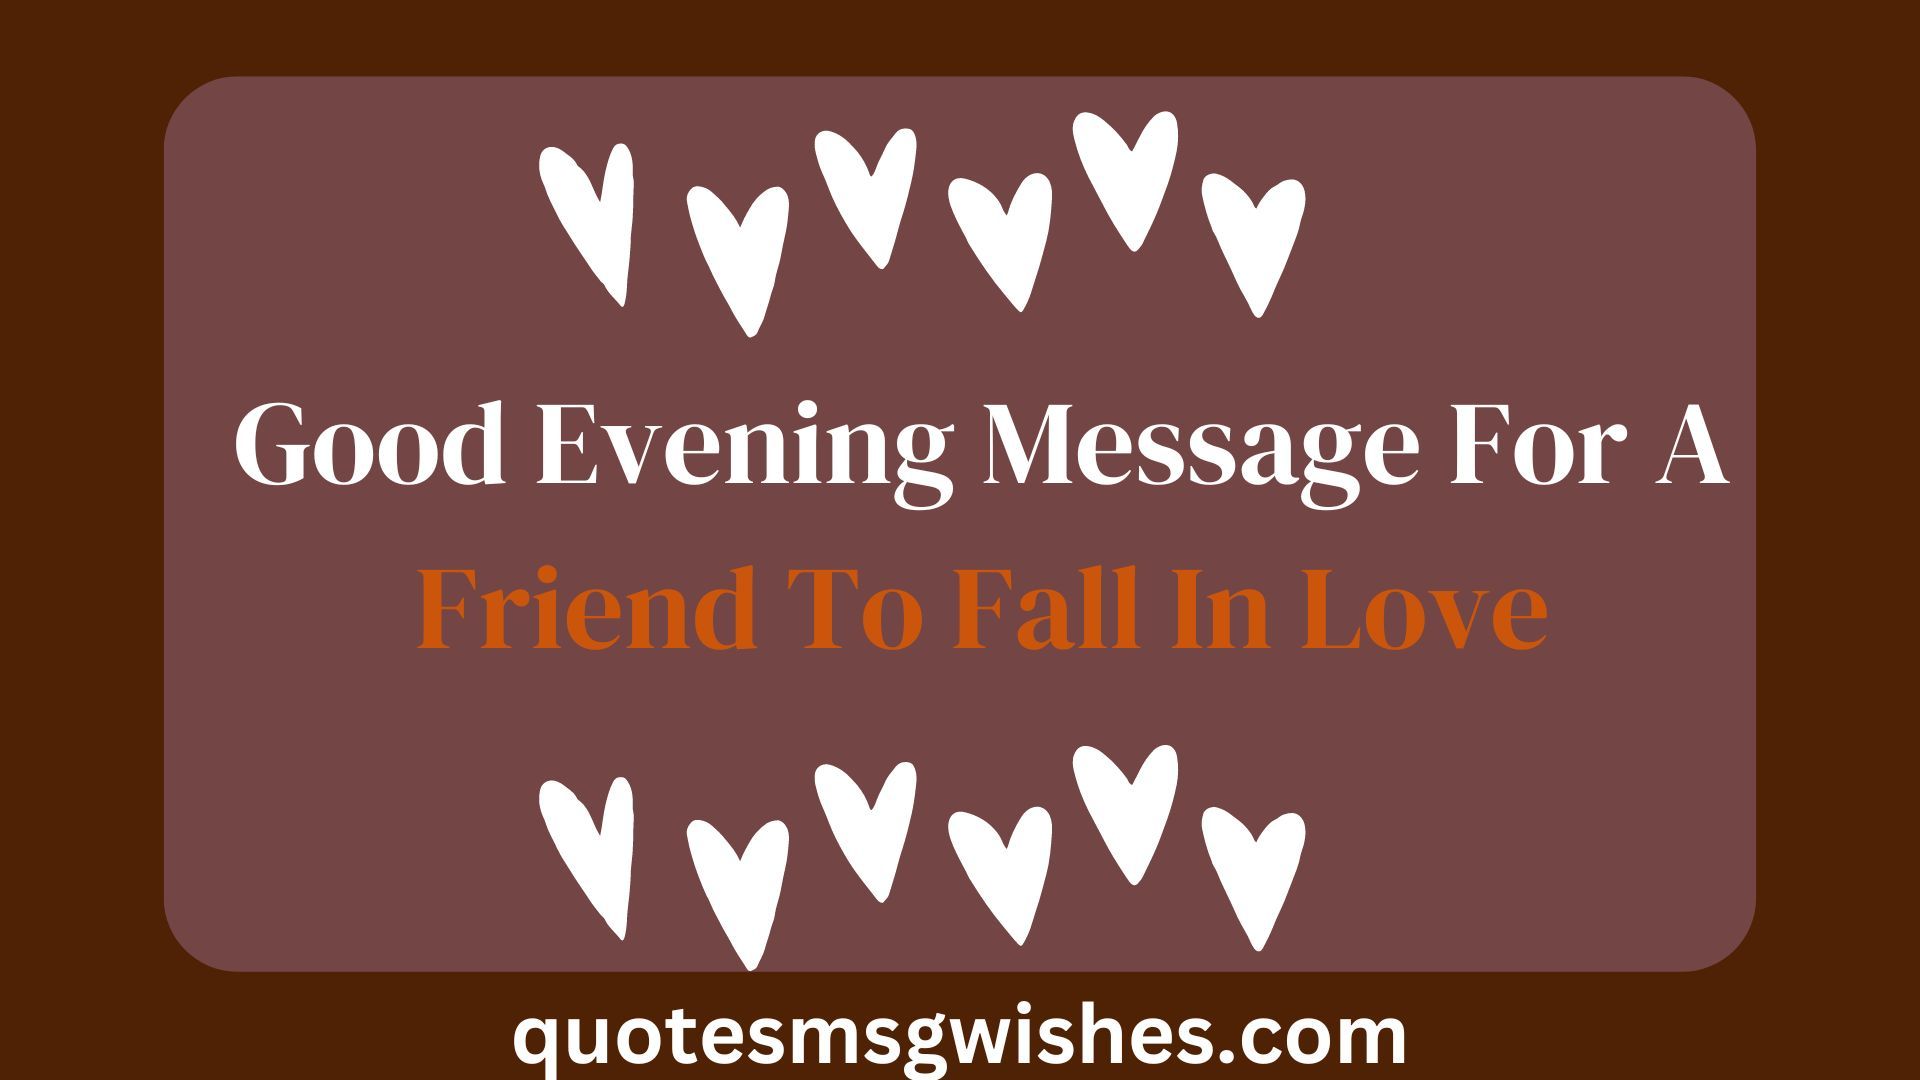 Good Evening Message For A Friend To Fall In Love